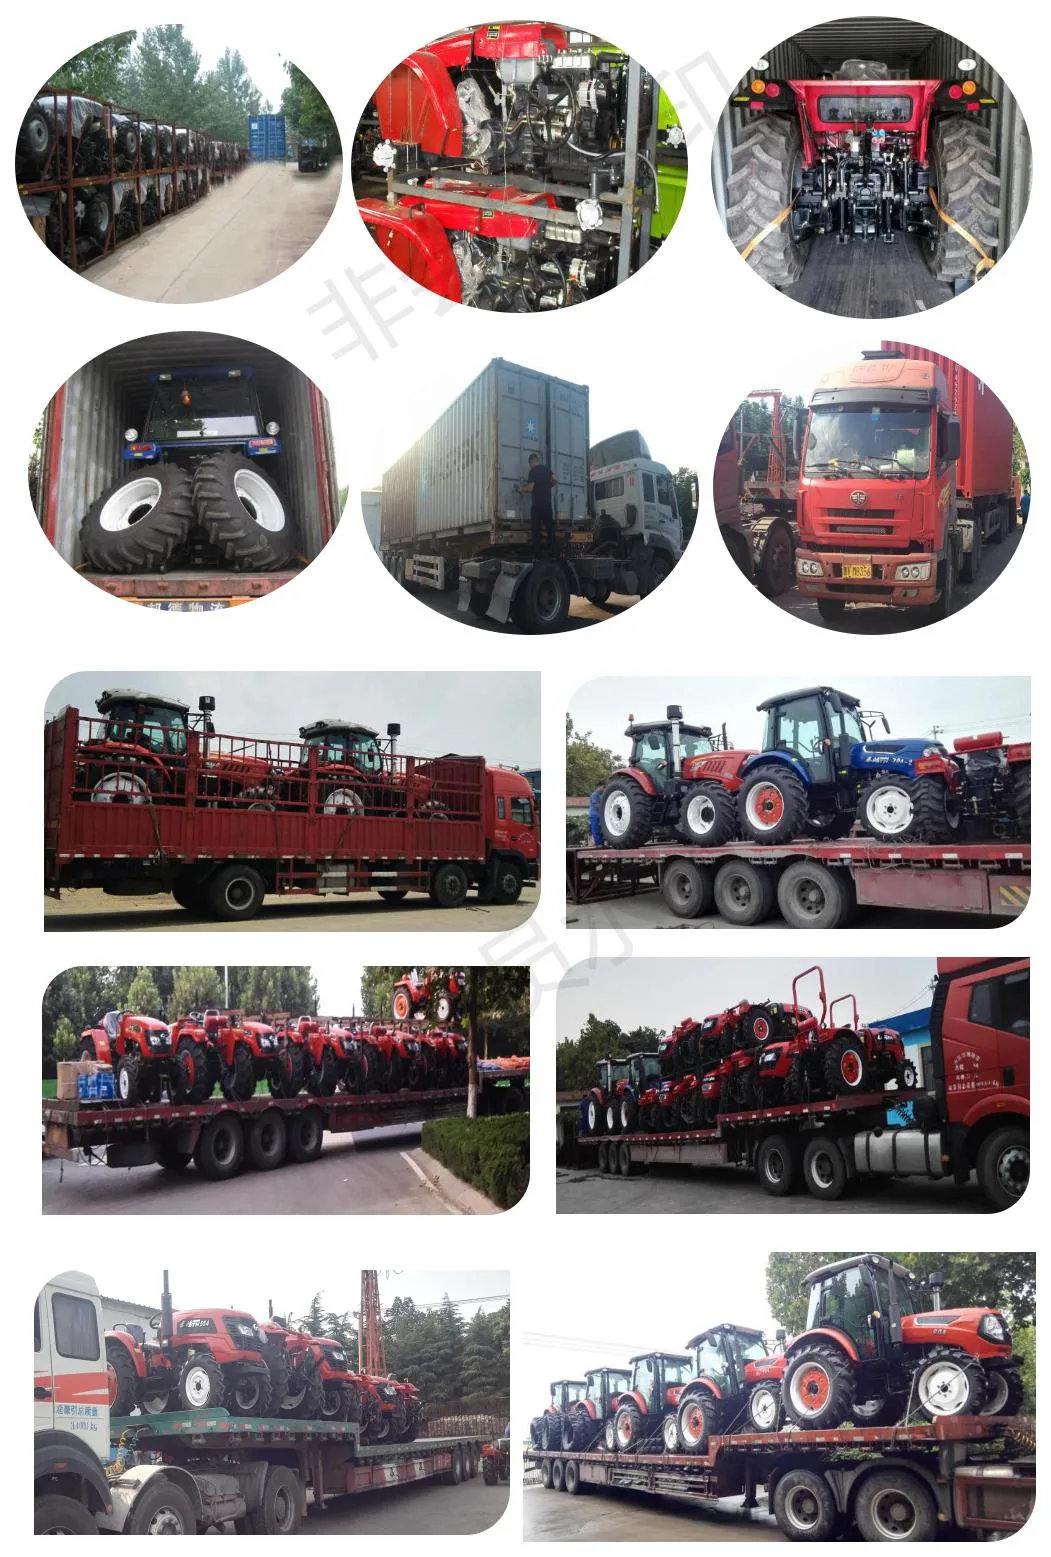 Taihong 150HP, 180HP, 200HP Wheel Tractor, Lawn Tractor Backhoe Tractor